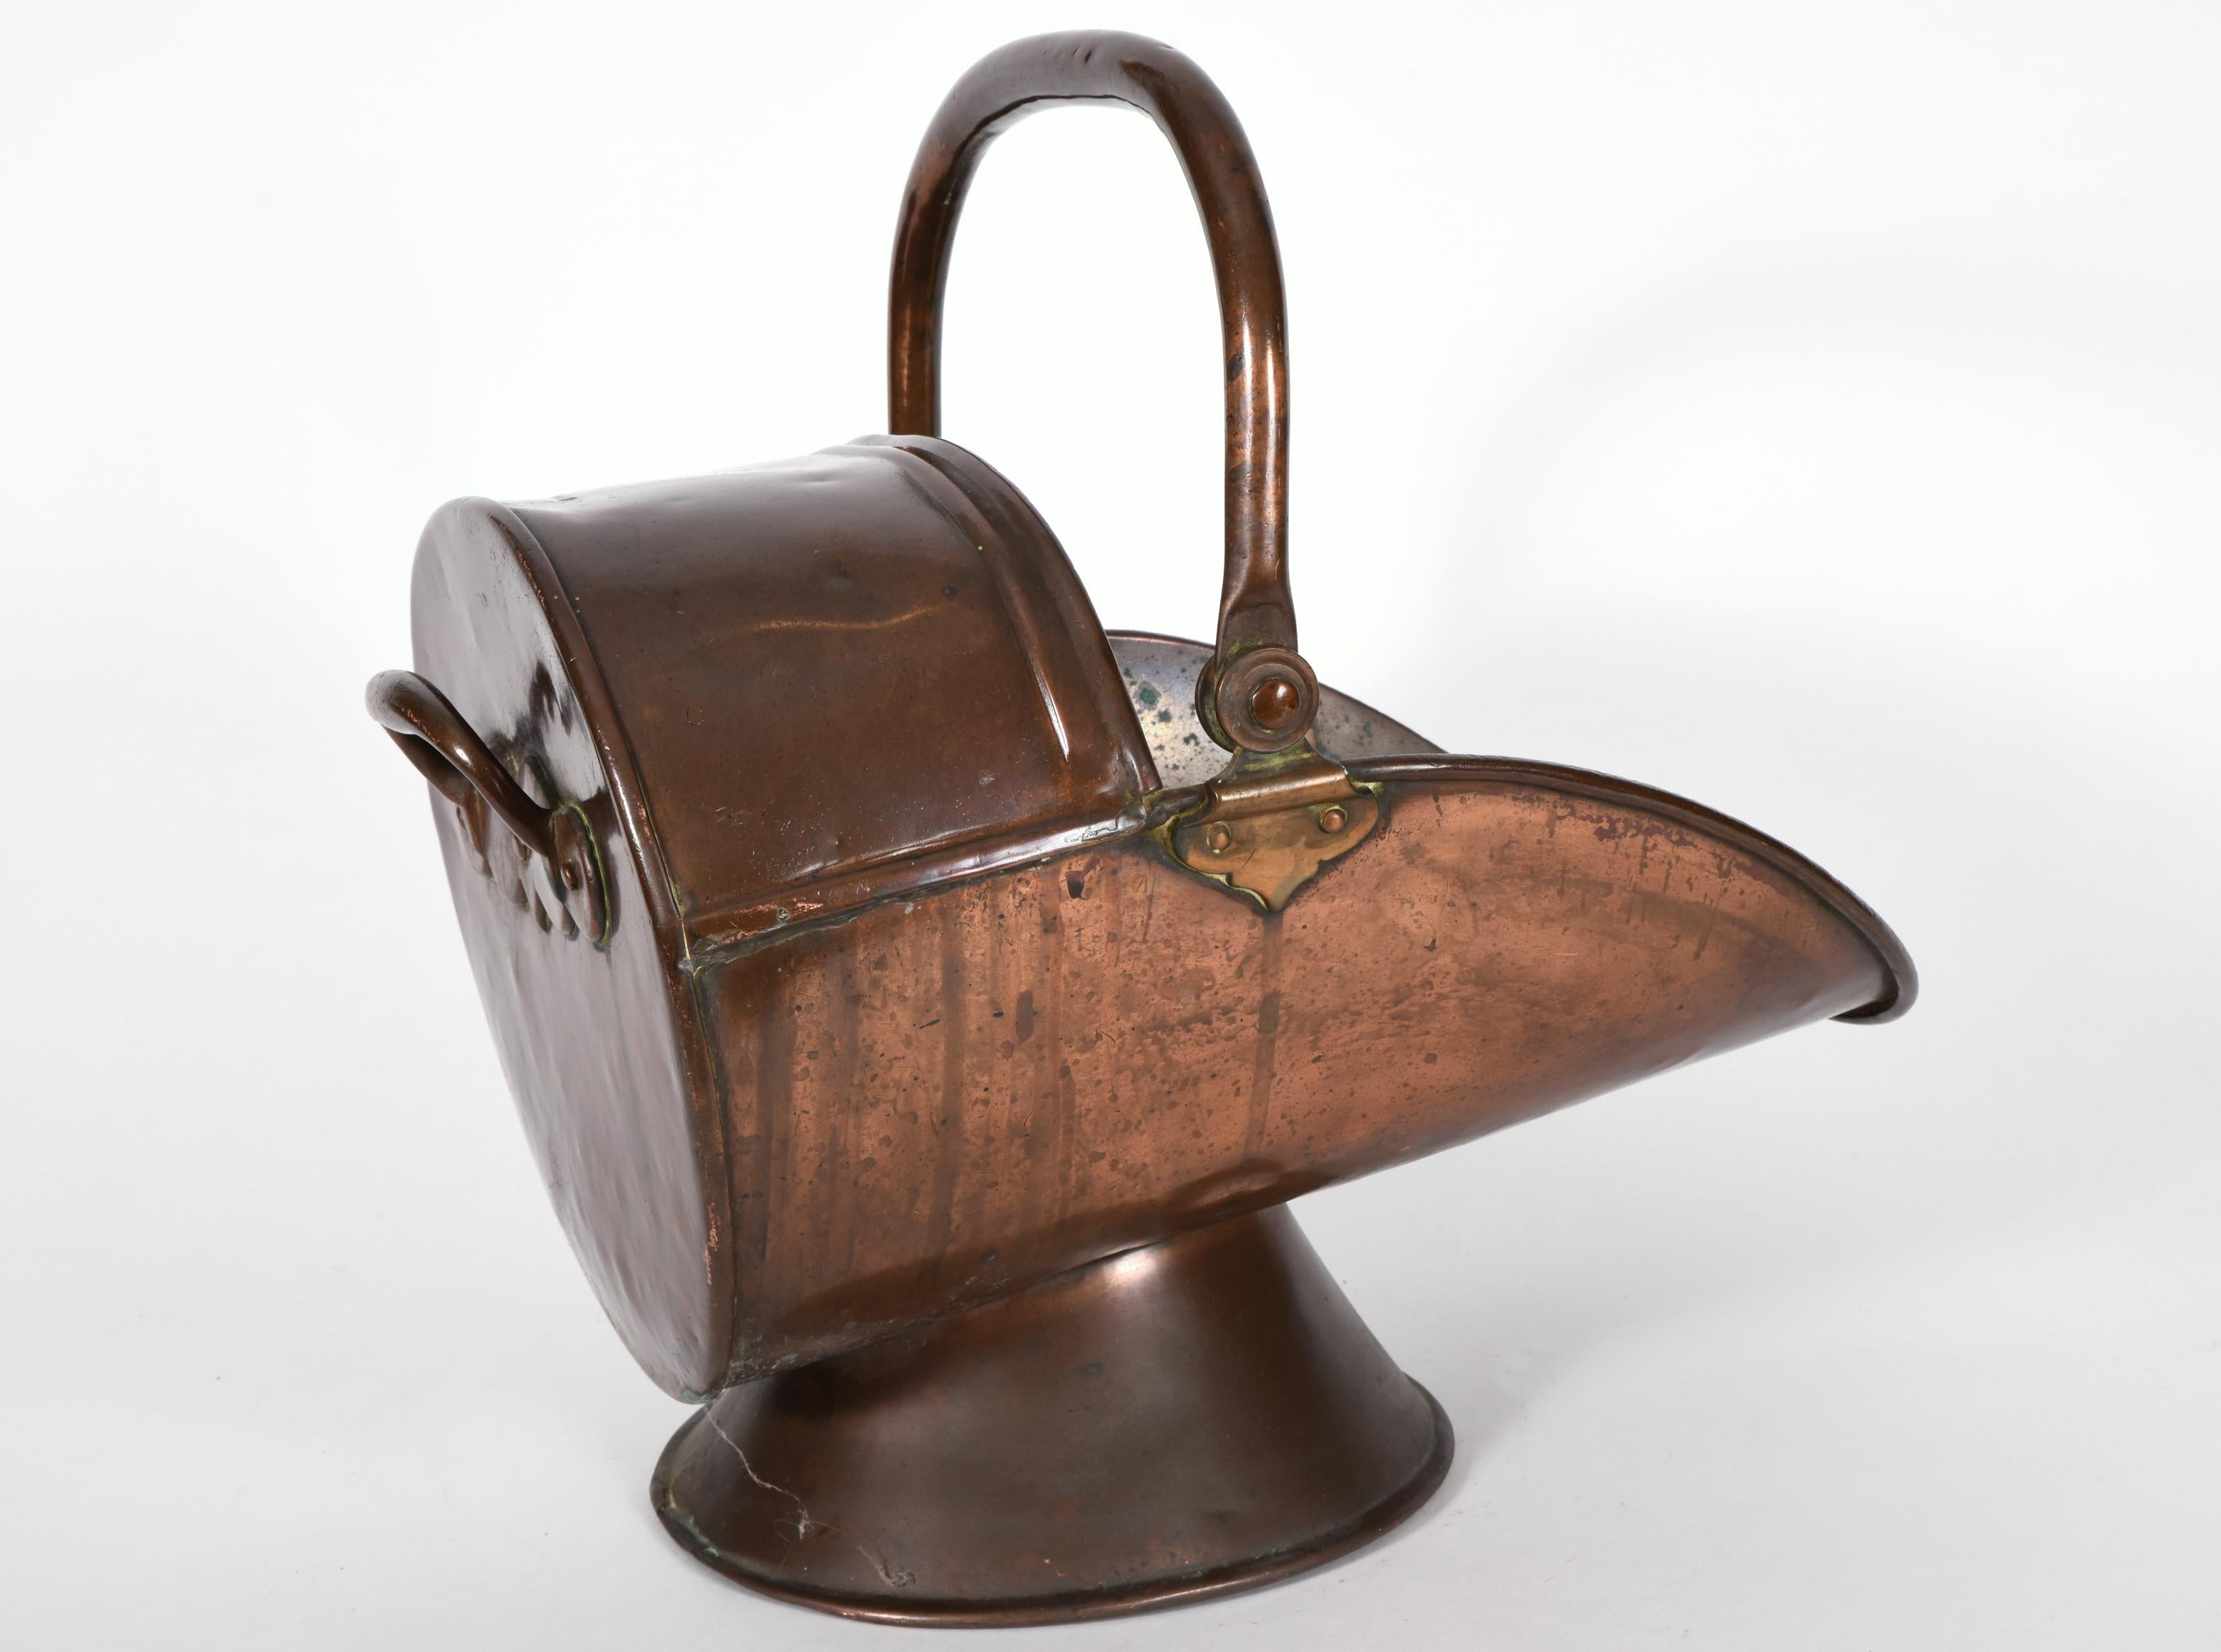 Early 20th century copper and brass coal or logs bucket with a heavy swing handle and stands off the floor on a slant. The coal or log bucket is in good used condition. The coal bucket measure about 11 inches high X 15 inches length X 8.5 base